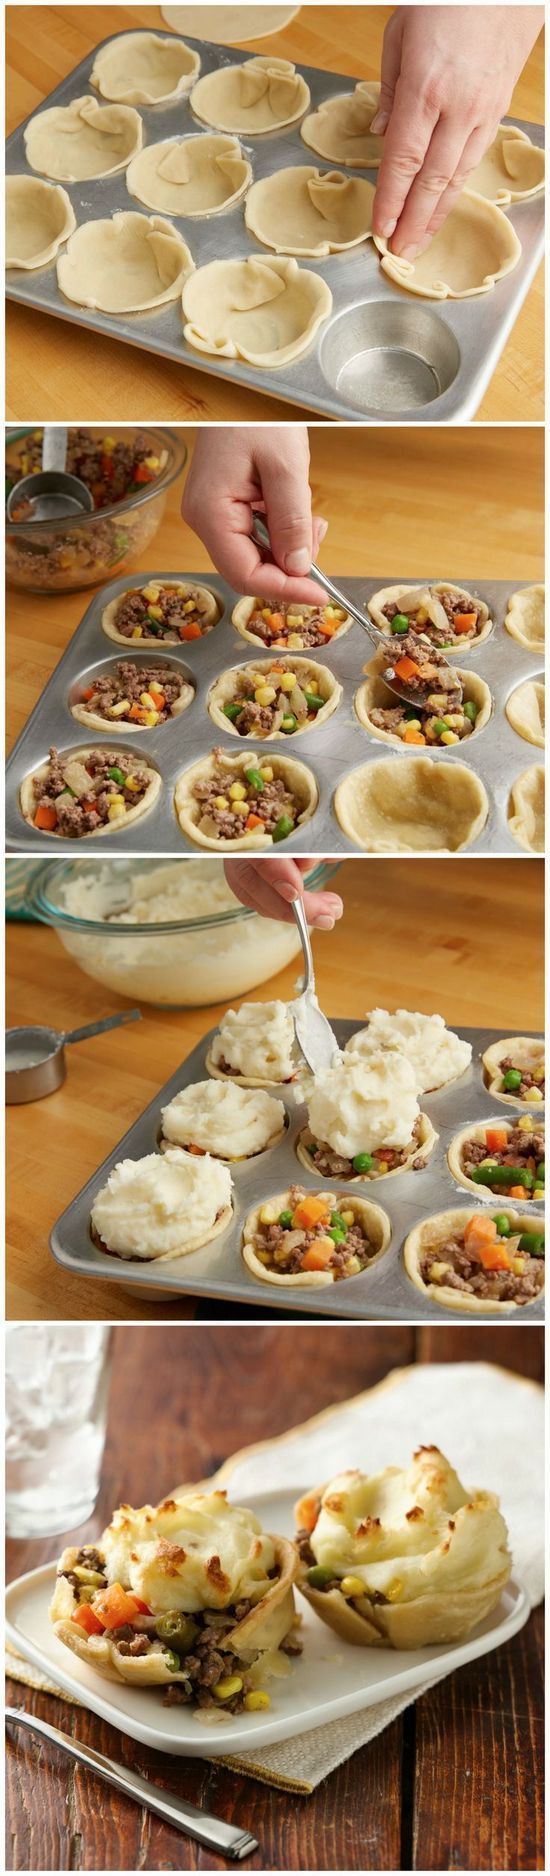 Mini Shepherd’s Pot Pies | Mini shepherd’s pies are sure to be a new family favorite recipe! Use purchased or leftover mashed potatoes for a quick and easy